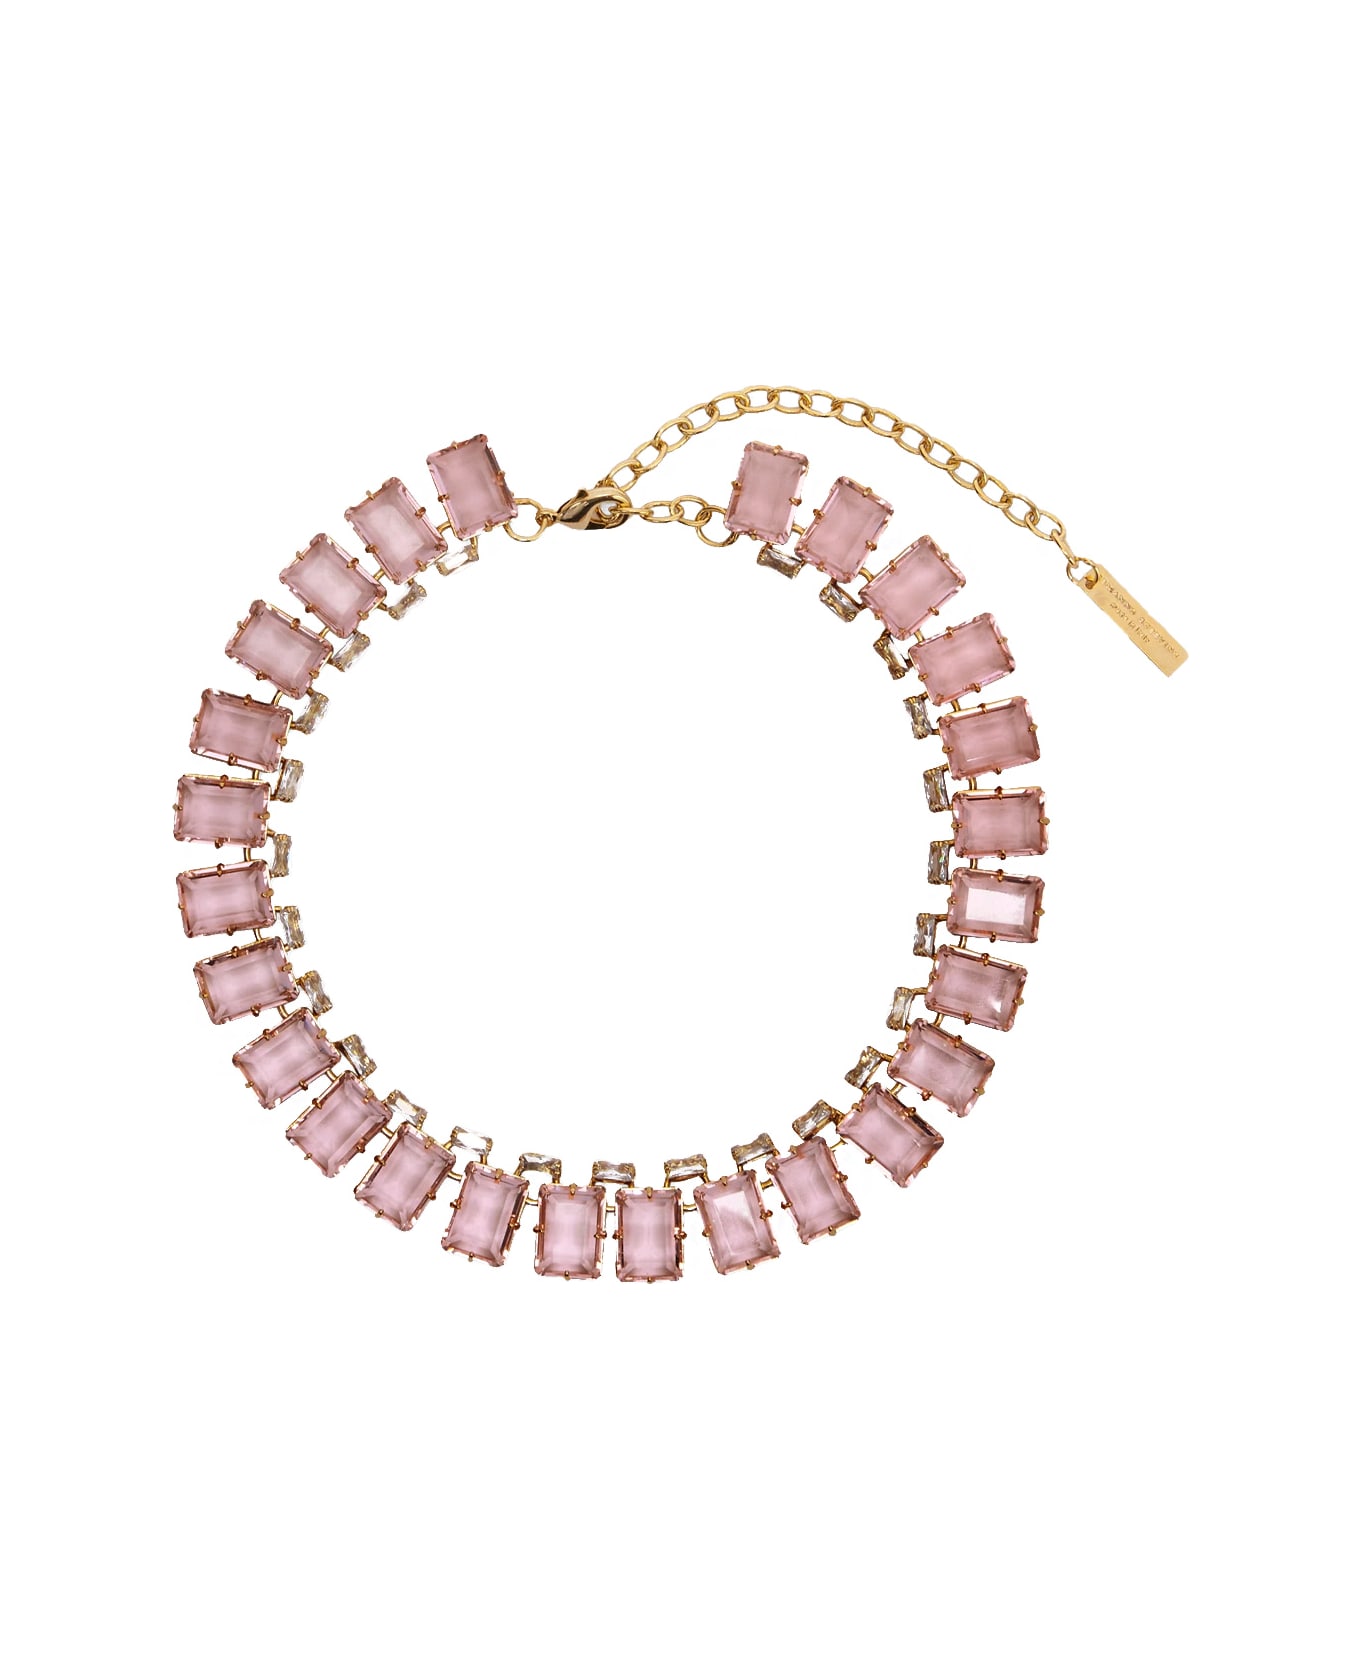 Ermanno Scervino Necklace With Pink Stones - Pink